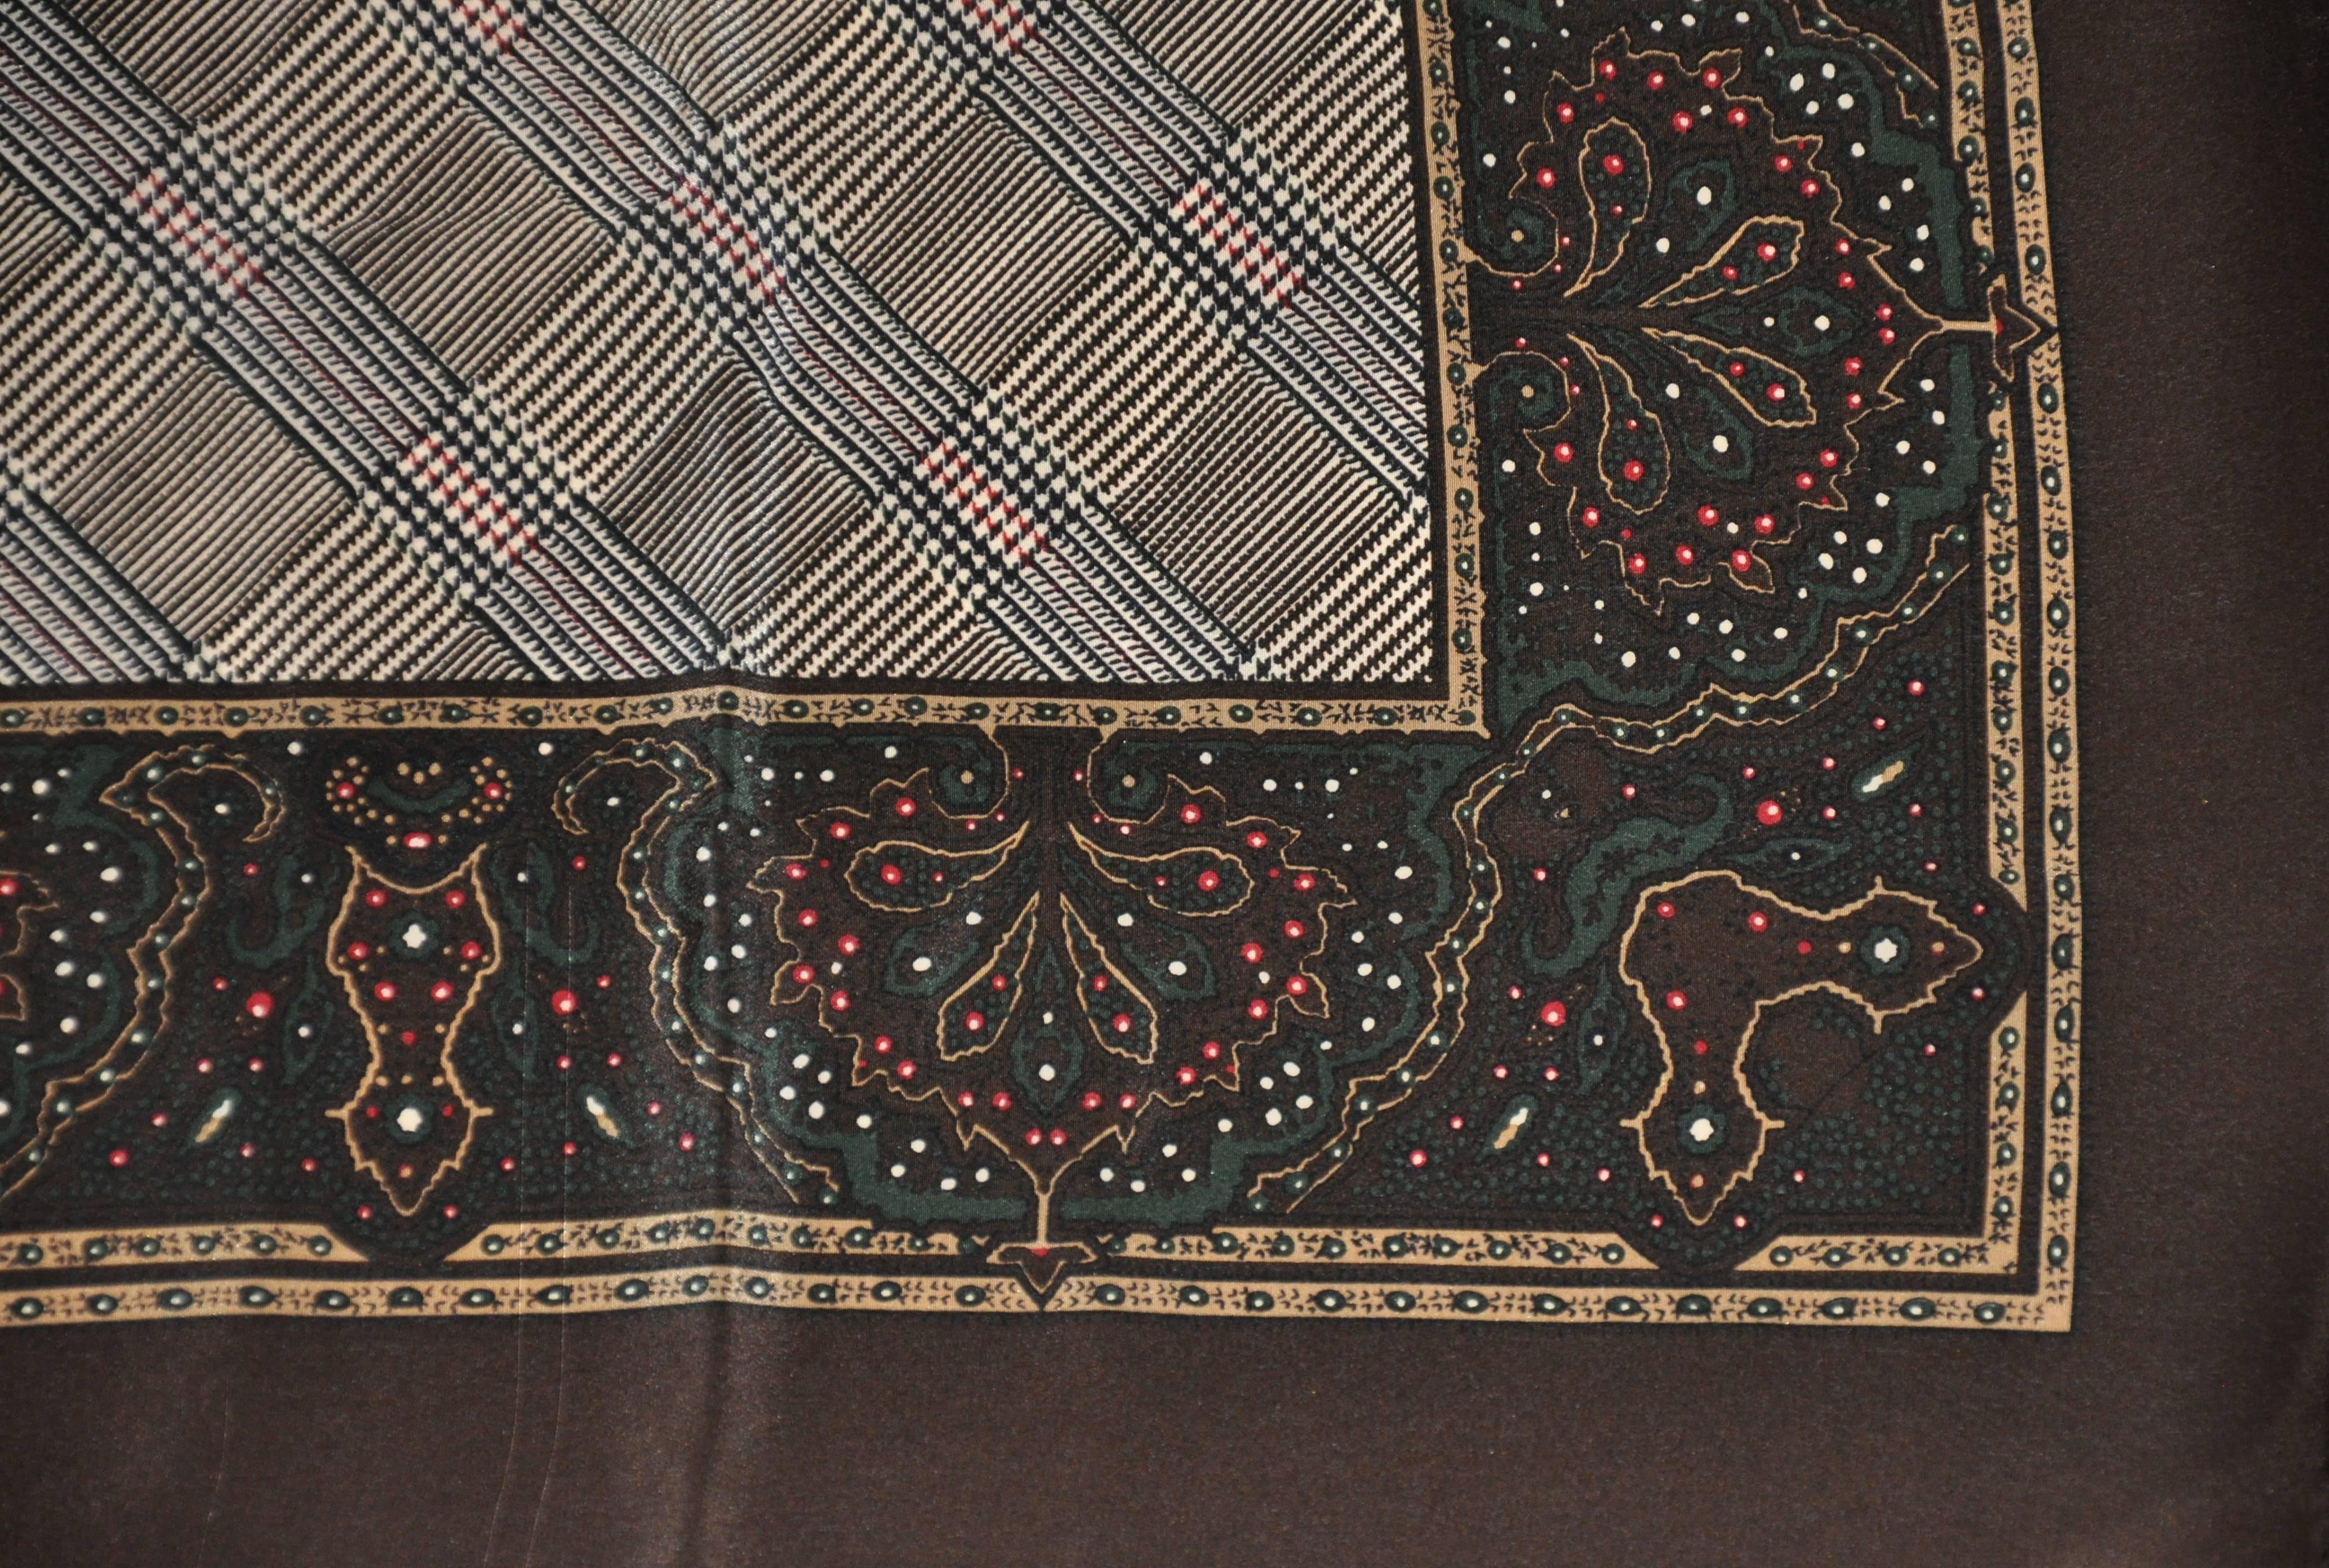 Ralph Lauren coco brown palsey border silk scarf measures 30" x 30" and finished with hand-rolled edges. Made in Italy.